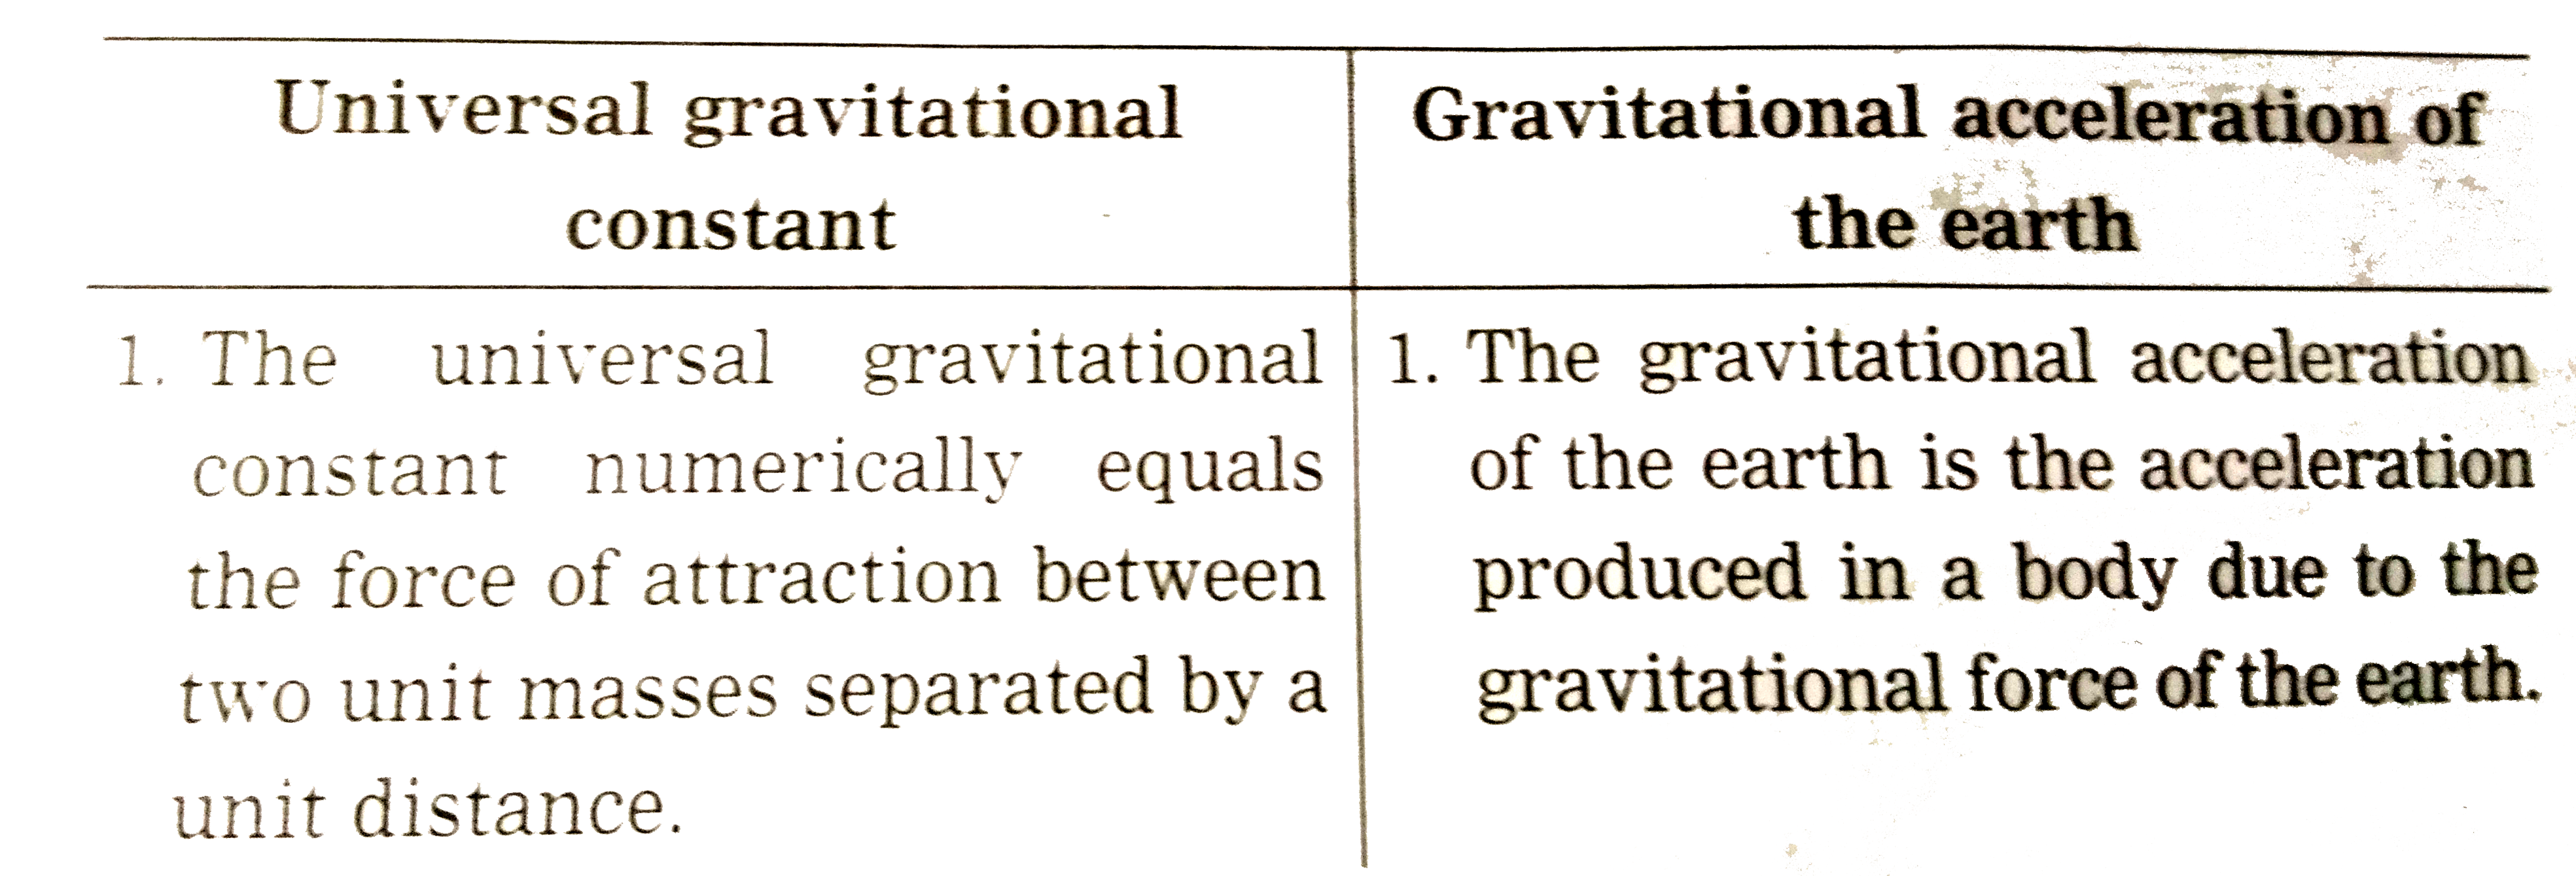 Universal Gravitational Constant And Gravitational Acceleration Of